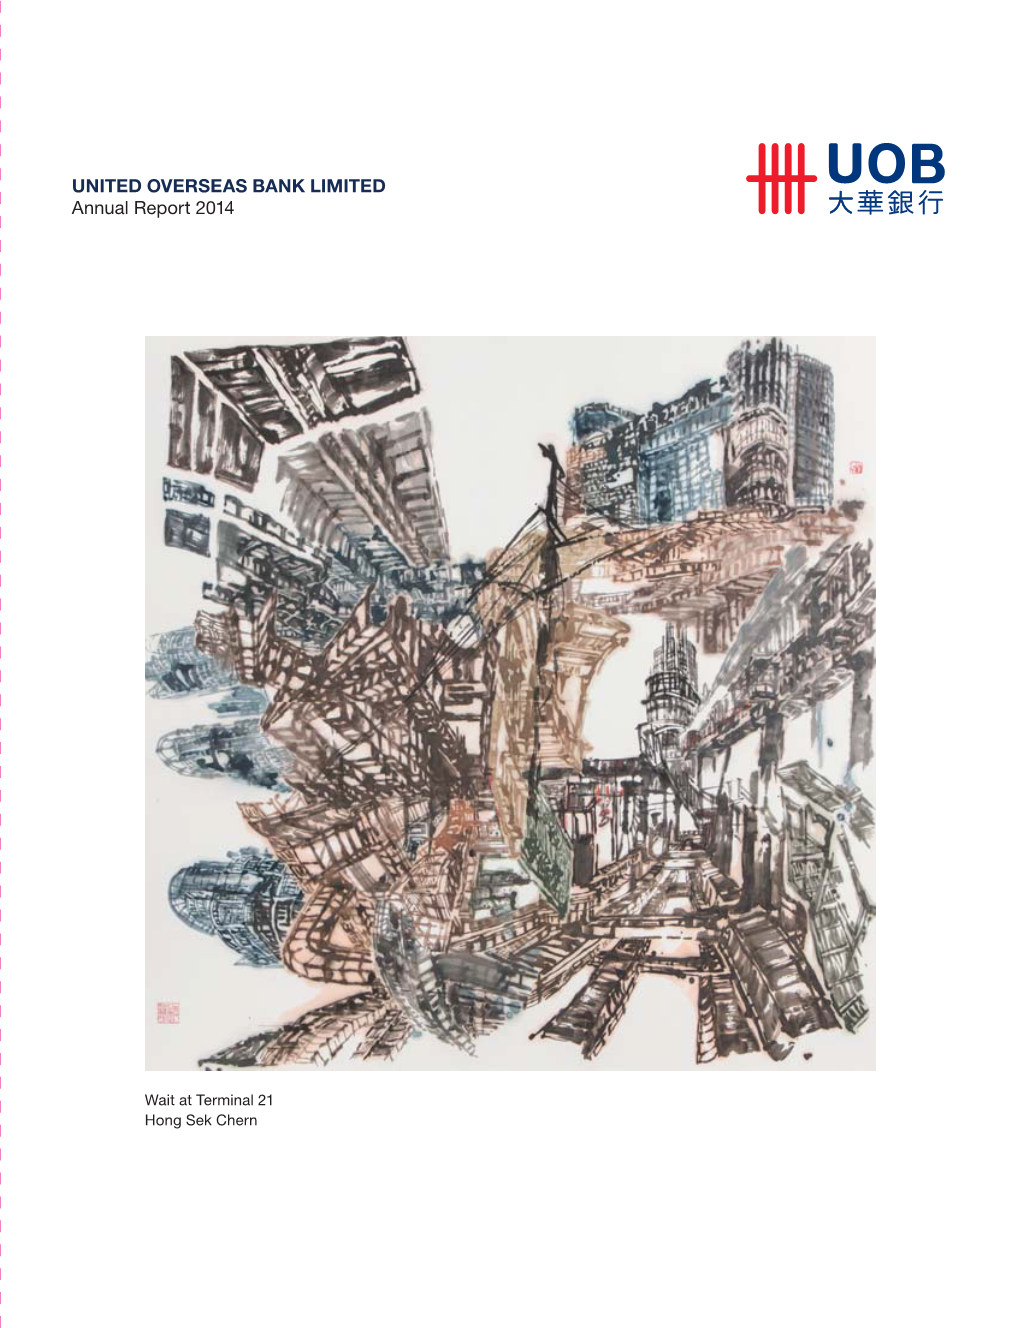 UNITED OVERSEAS BANK LIMITED Annual Report 2014